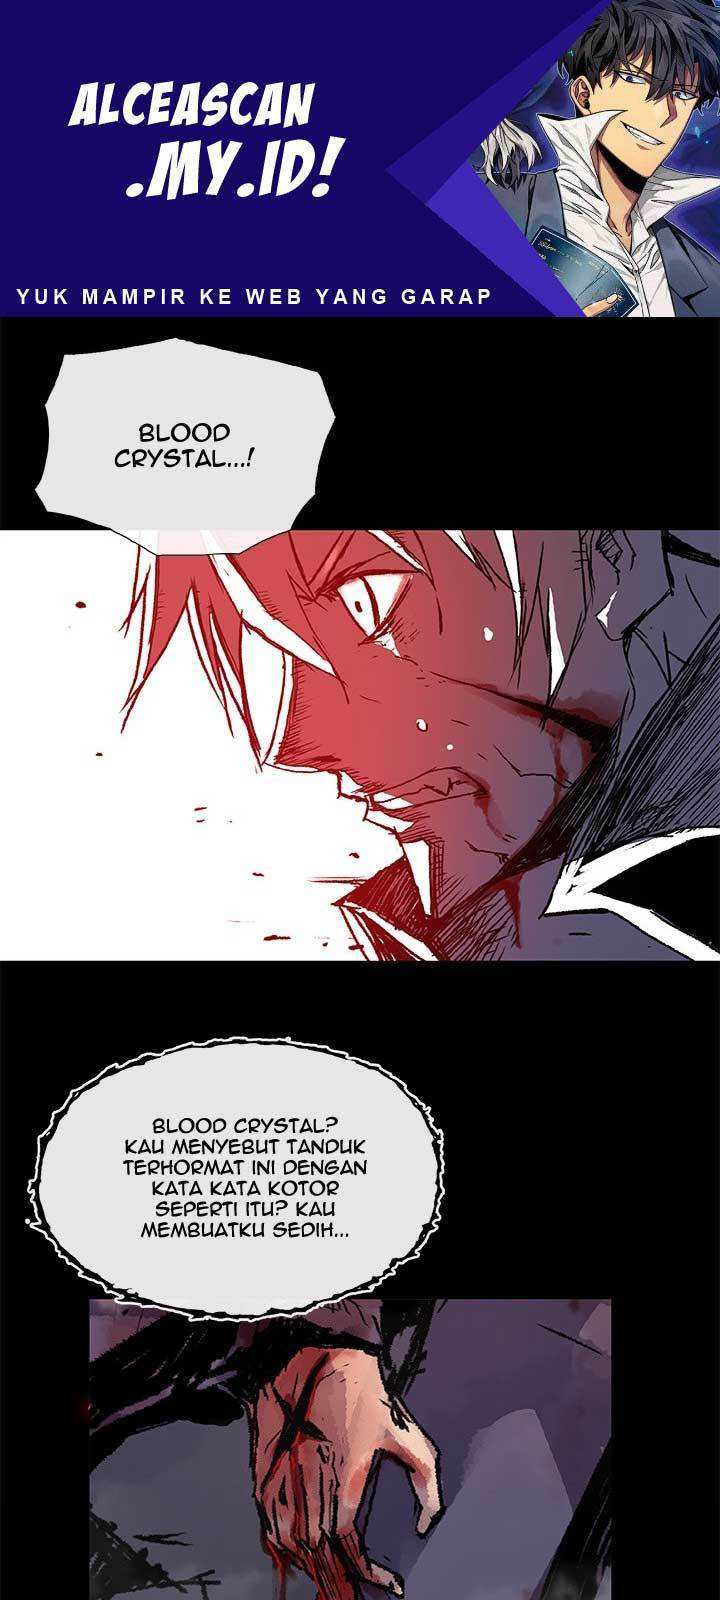 Blood Blade Chapter 04